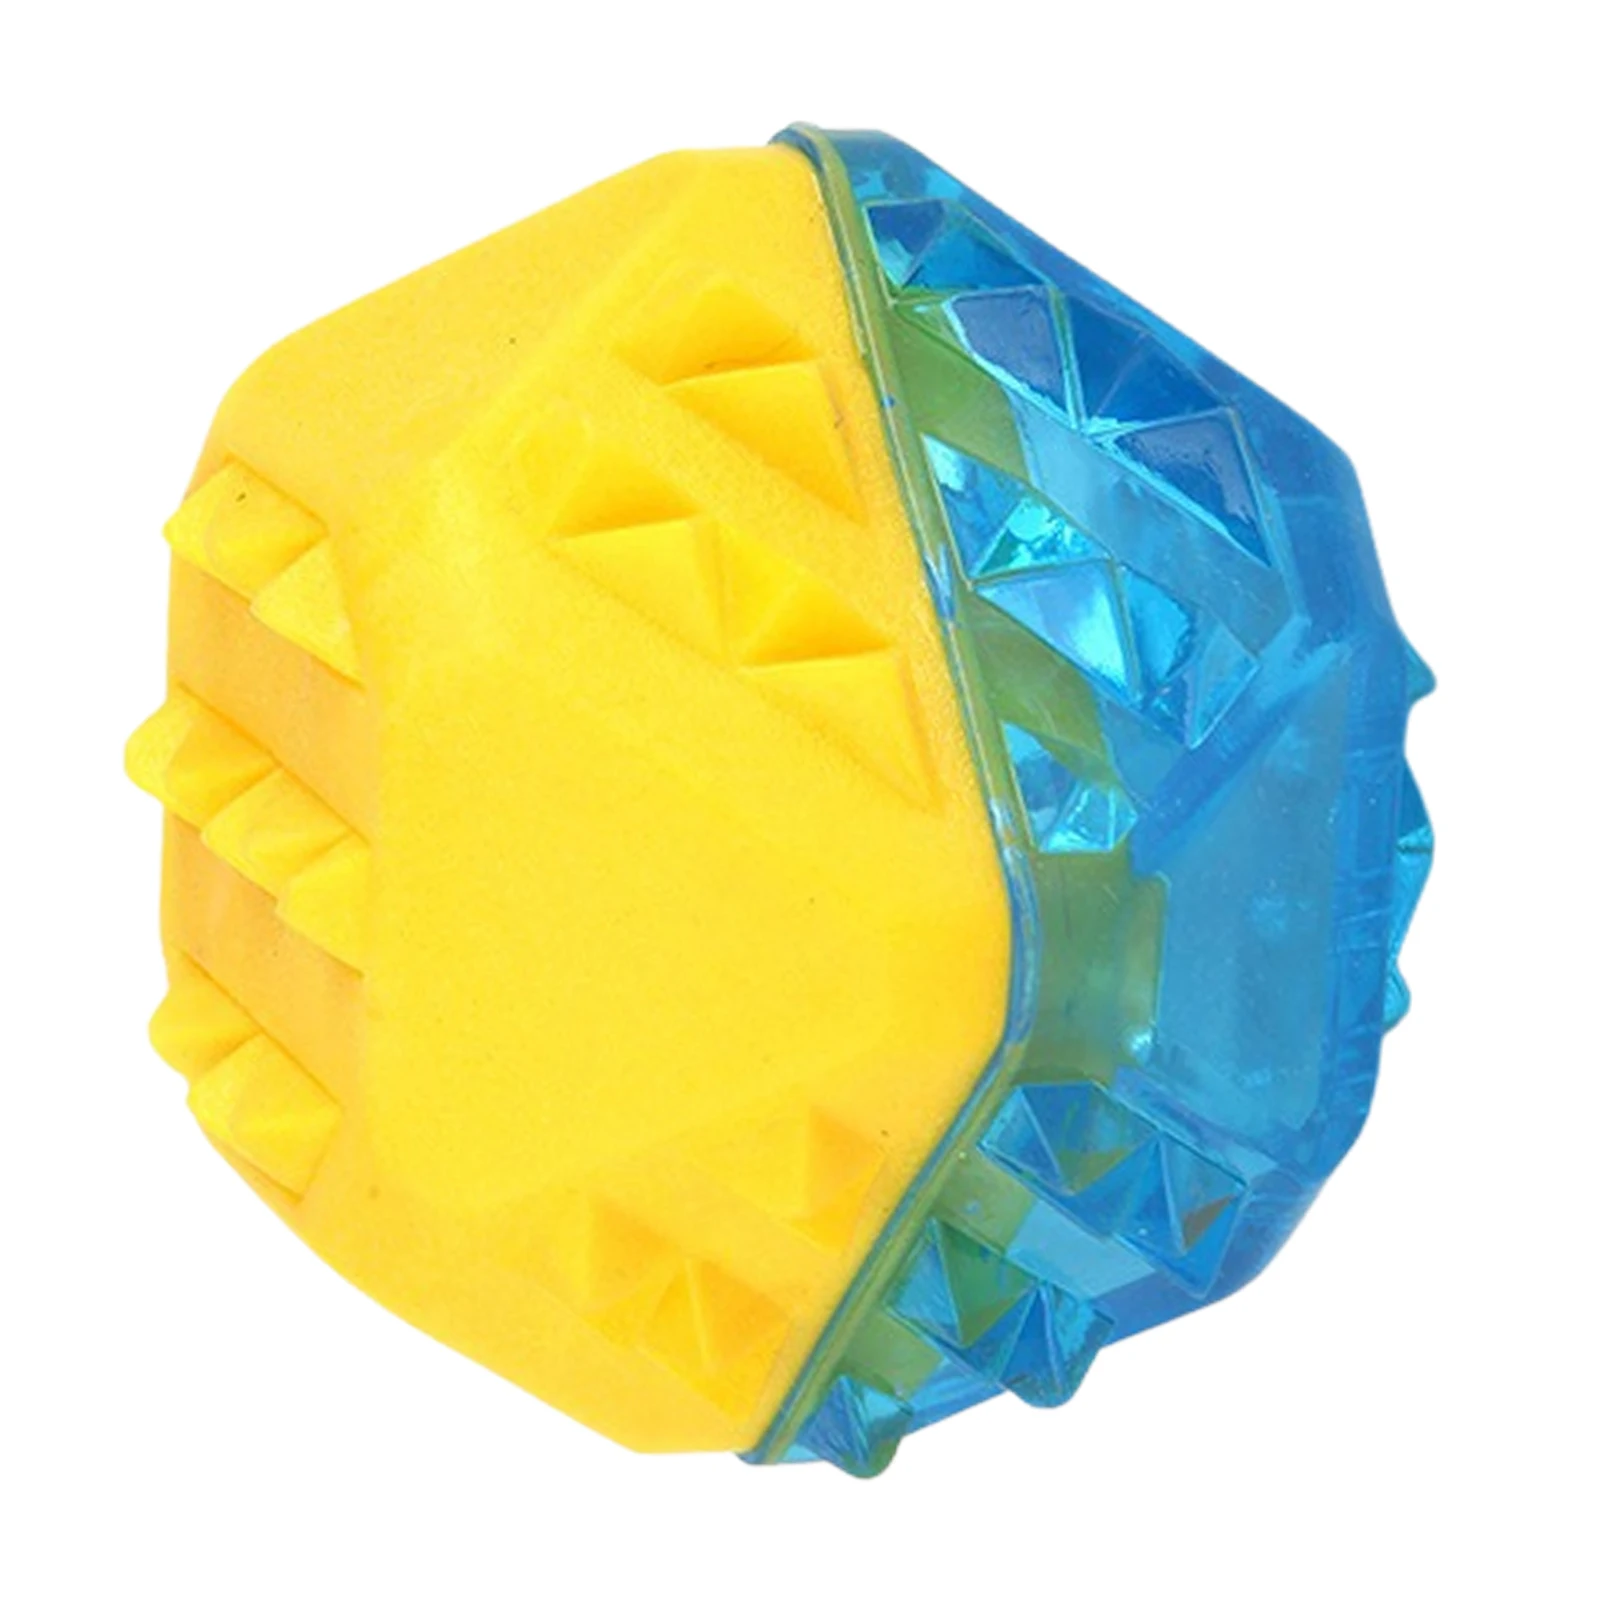 

Pet Dog Summer Cooling Toys Molar Toy Bite-resistant Puppy Teething Chewing Toy Frozen Ball Pets Dogs Accessories